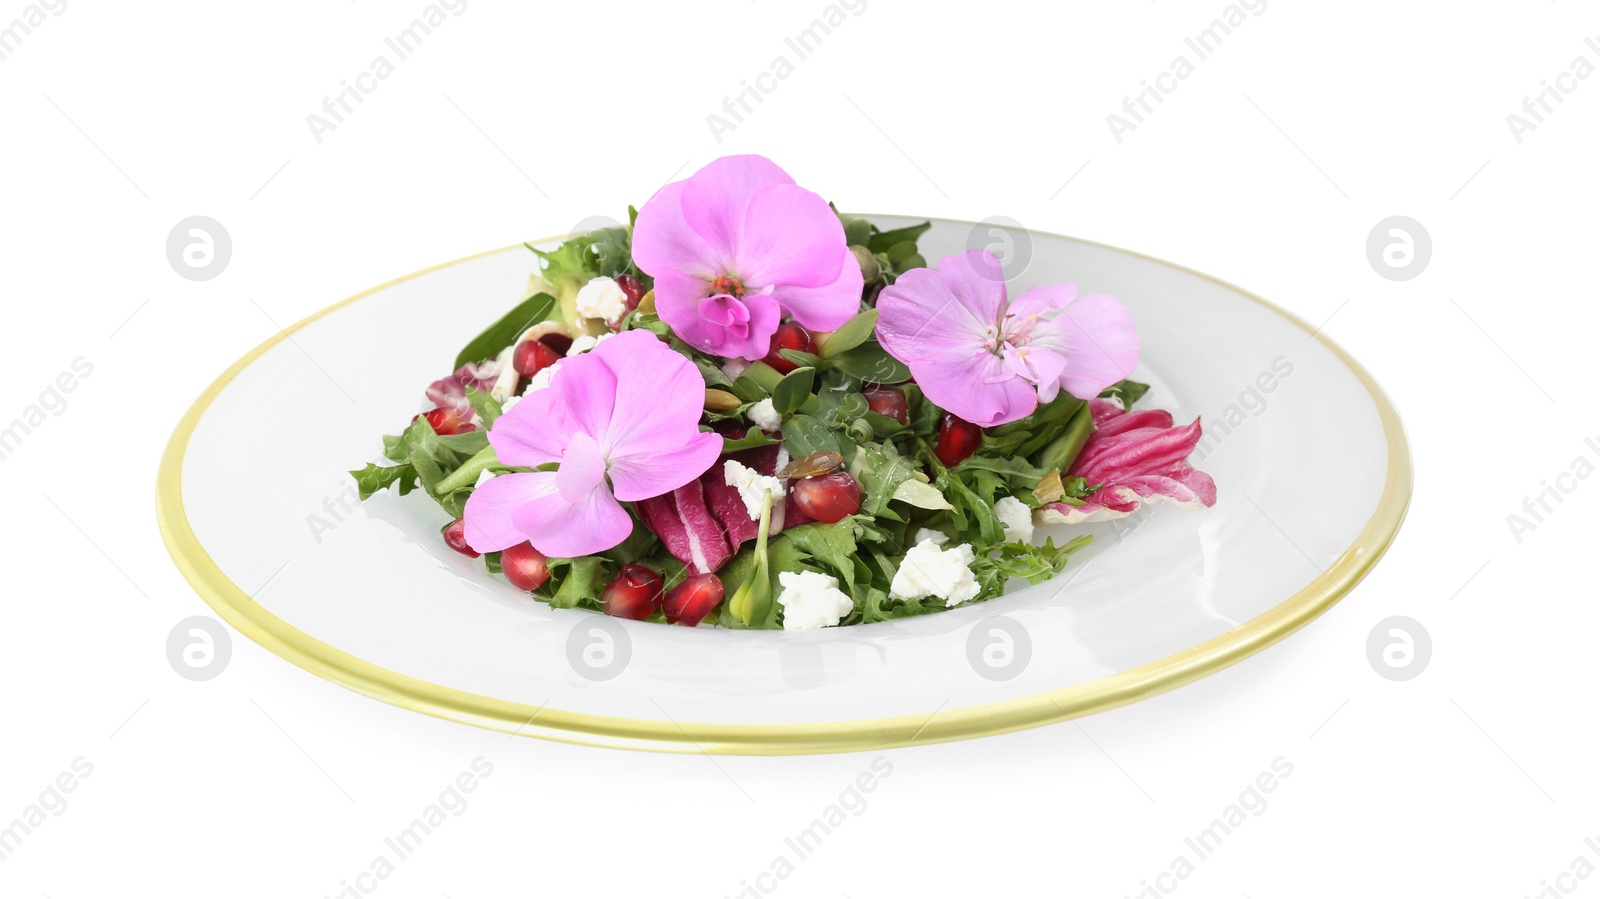 Photo of Fresh spring salad with flowers isolated on white